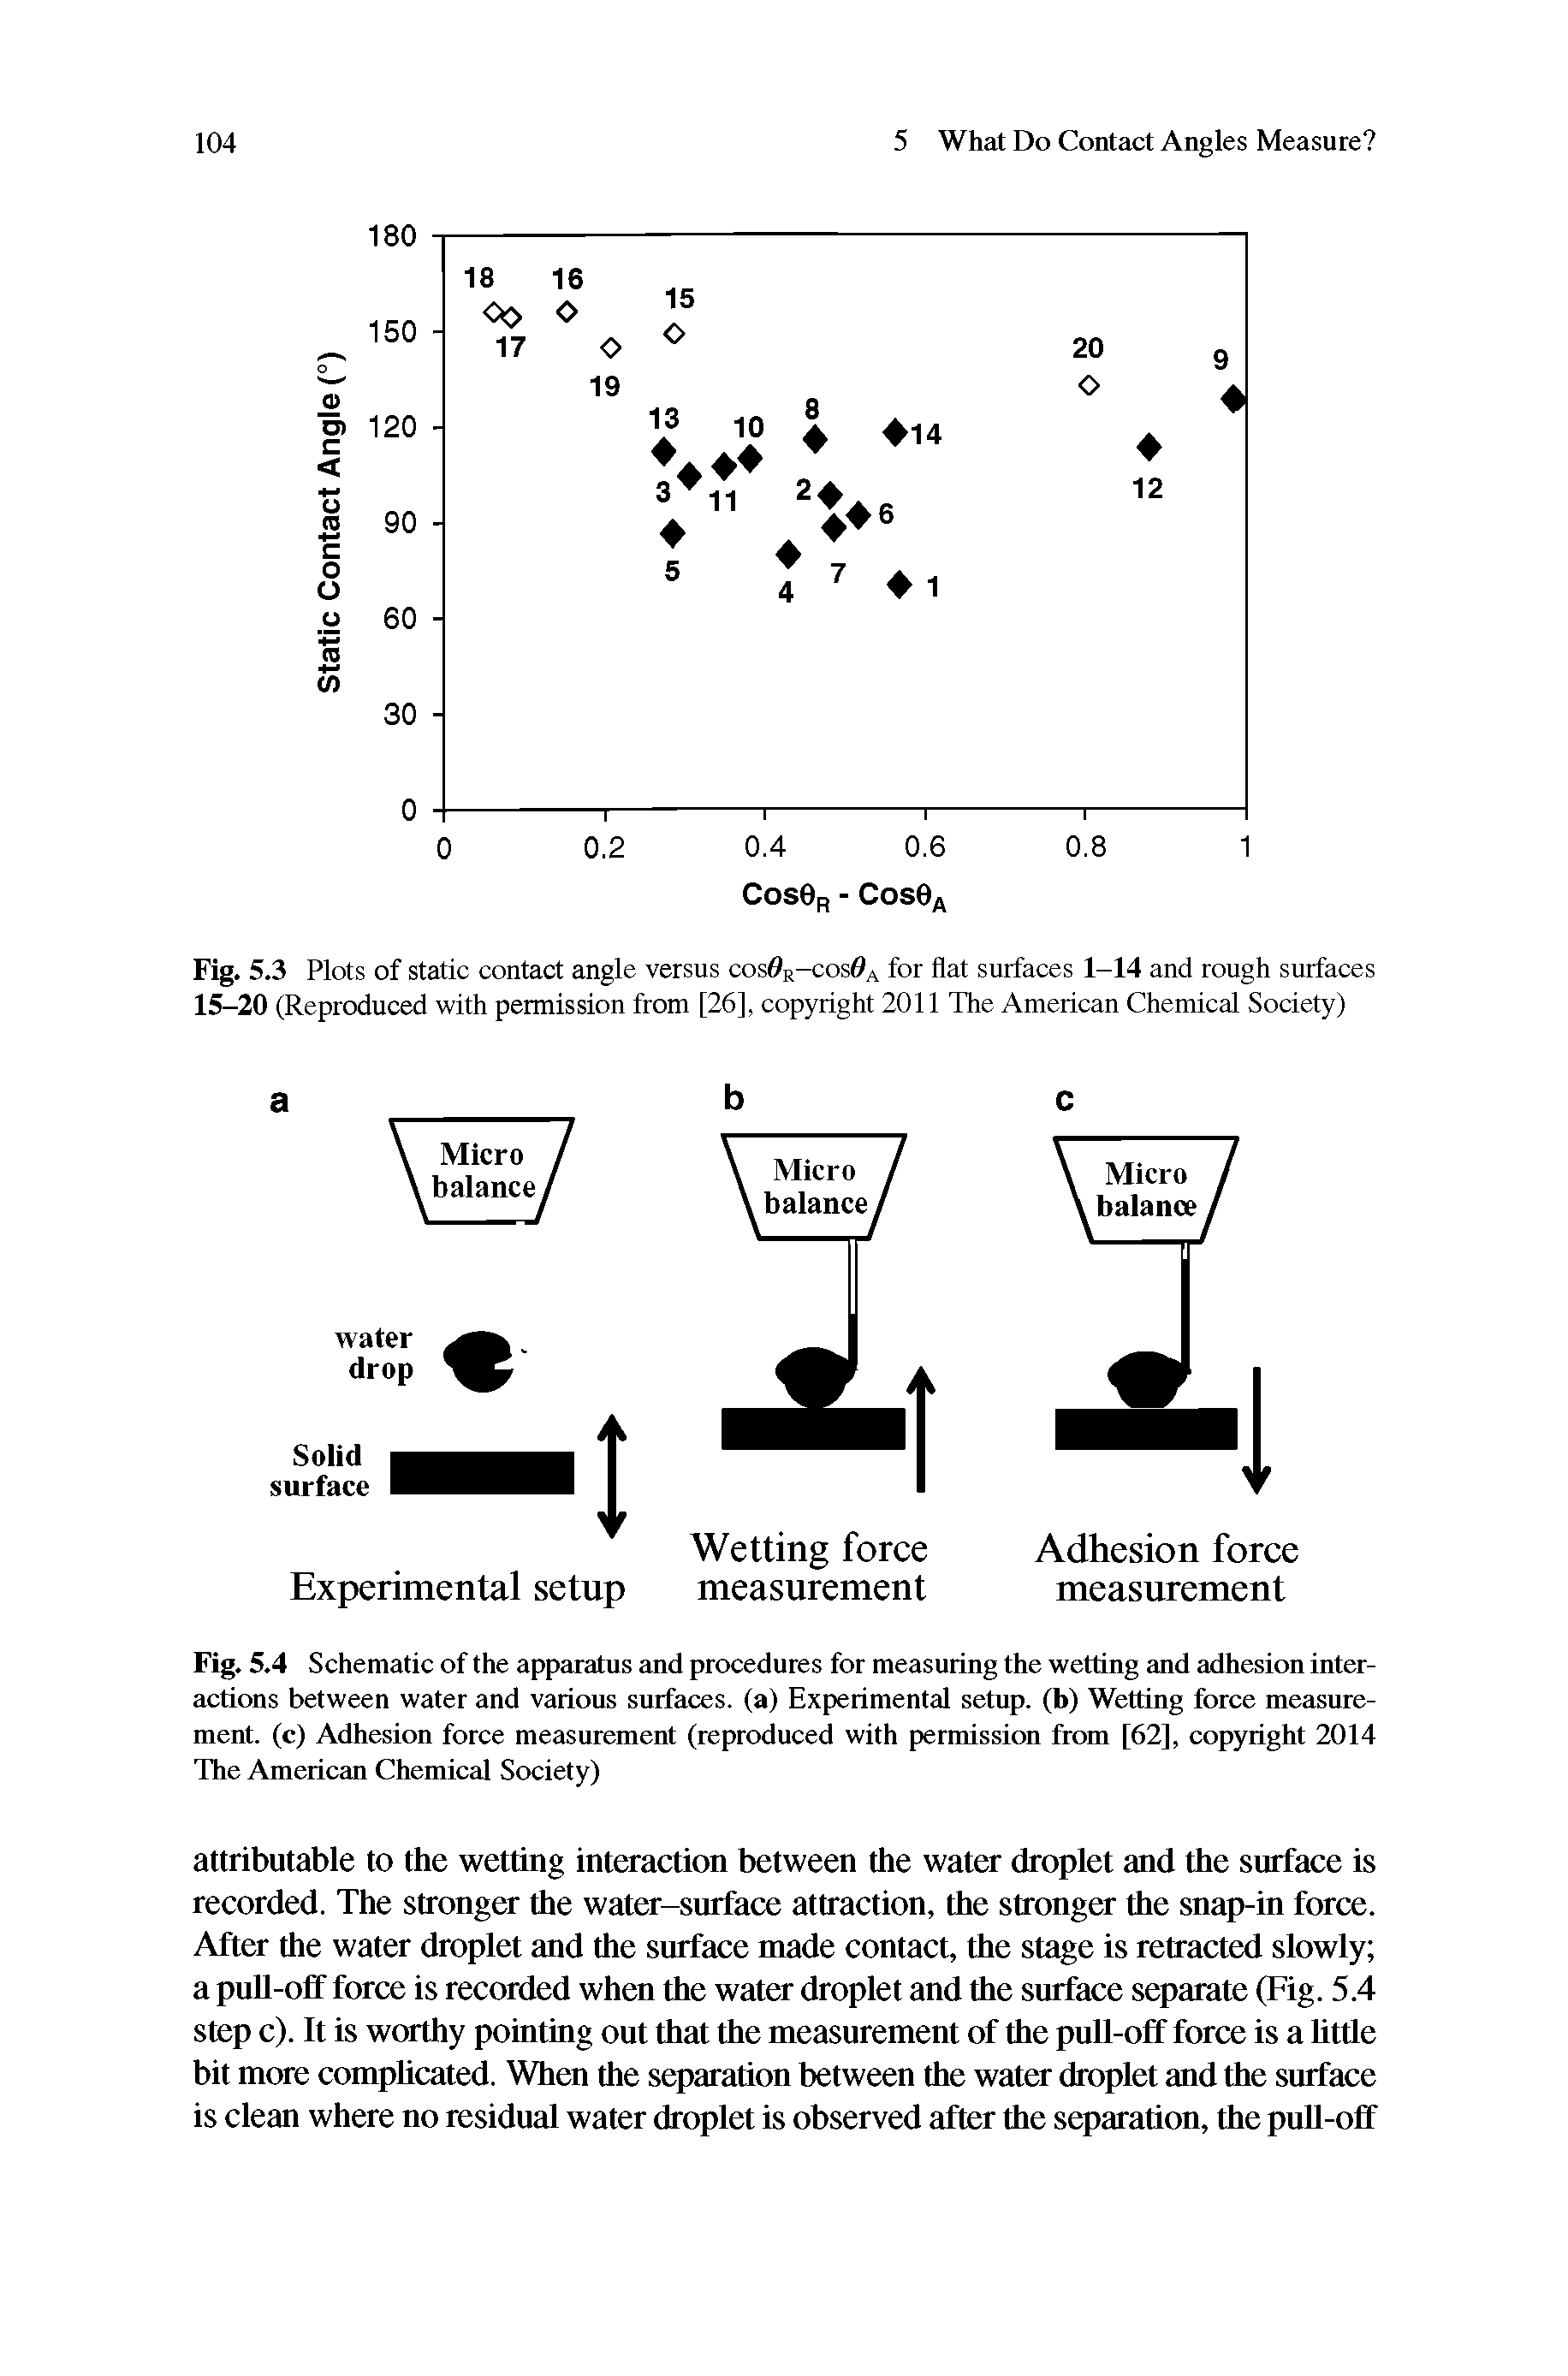 Fig. 5.4 Schematic of the apparatus and procedures for measuring the wetting and adhesion interactions between water and various surfaces, (a) Experimental setup, (h) Wetting force measurement. (c) Adhesion force measurement (reproduced with permission from [62], copyright 2014 The American Chemical Society)...